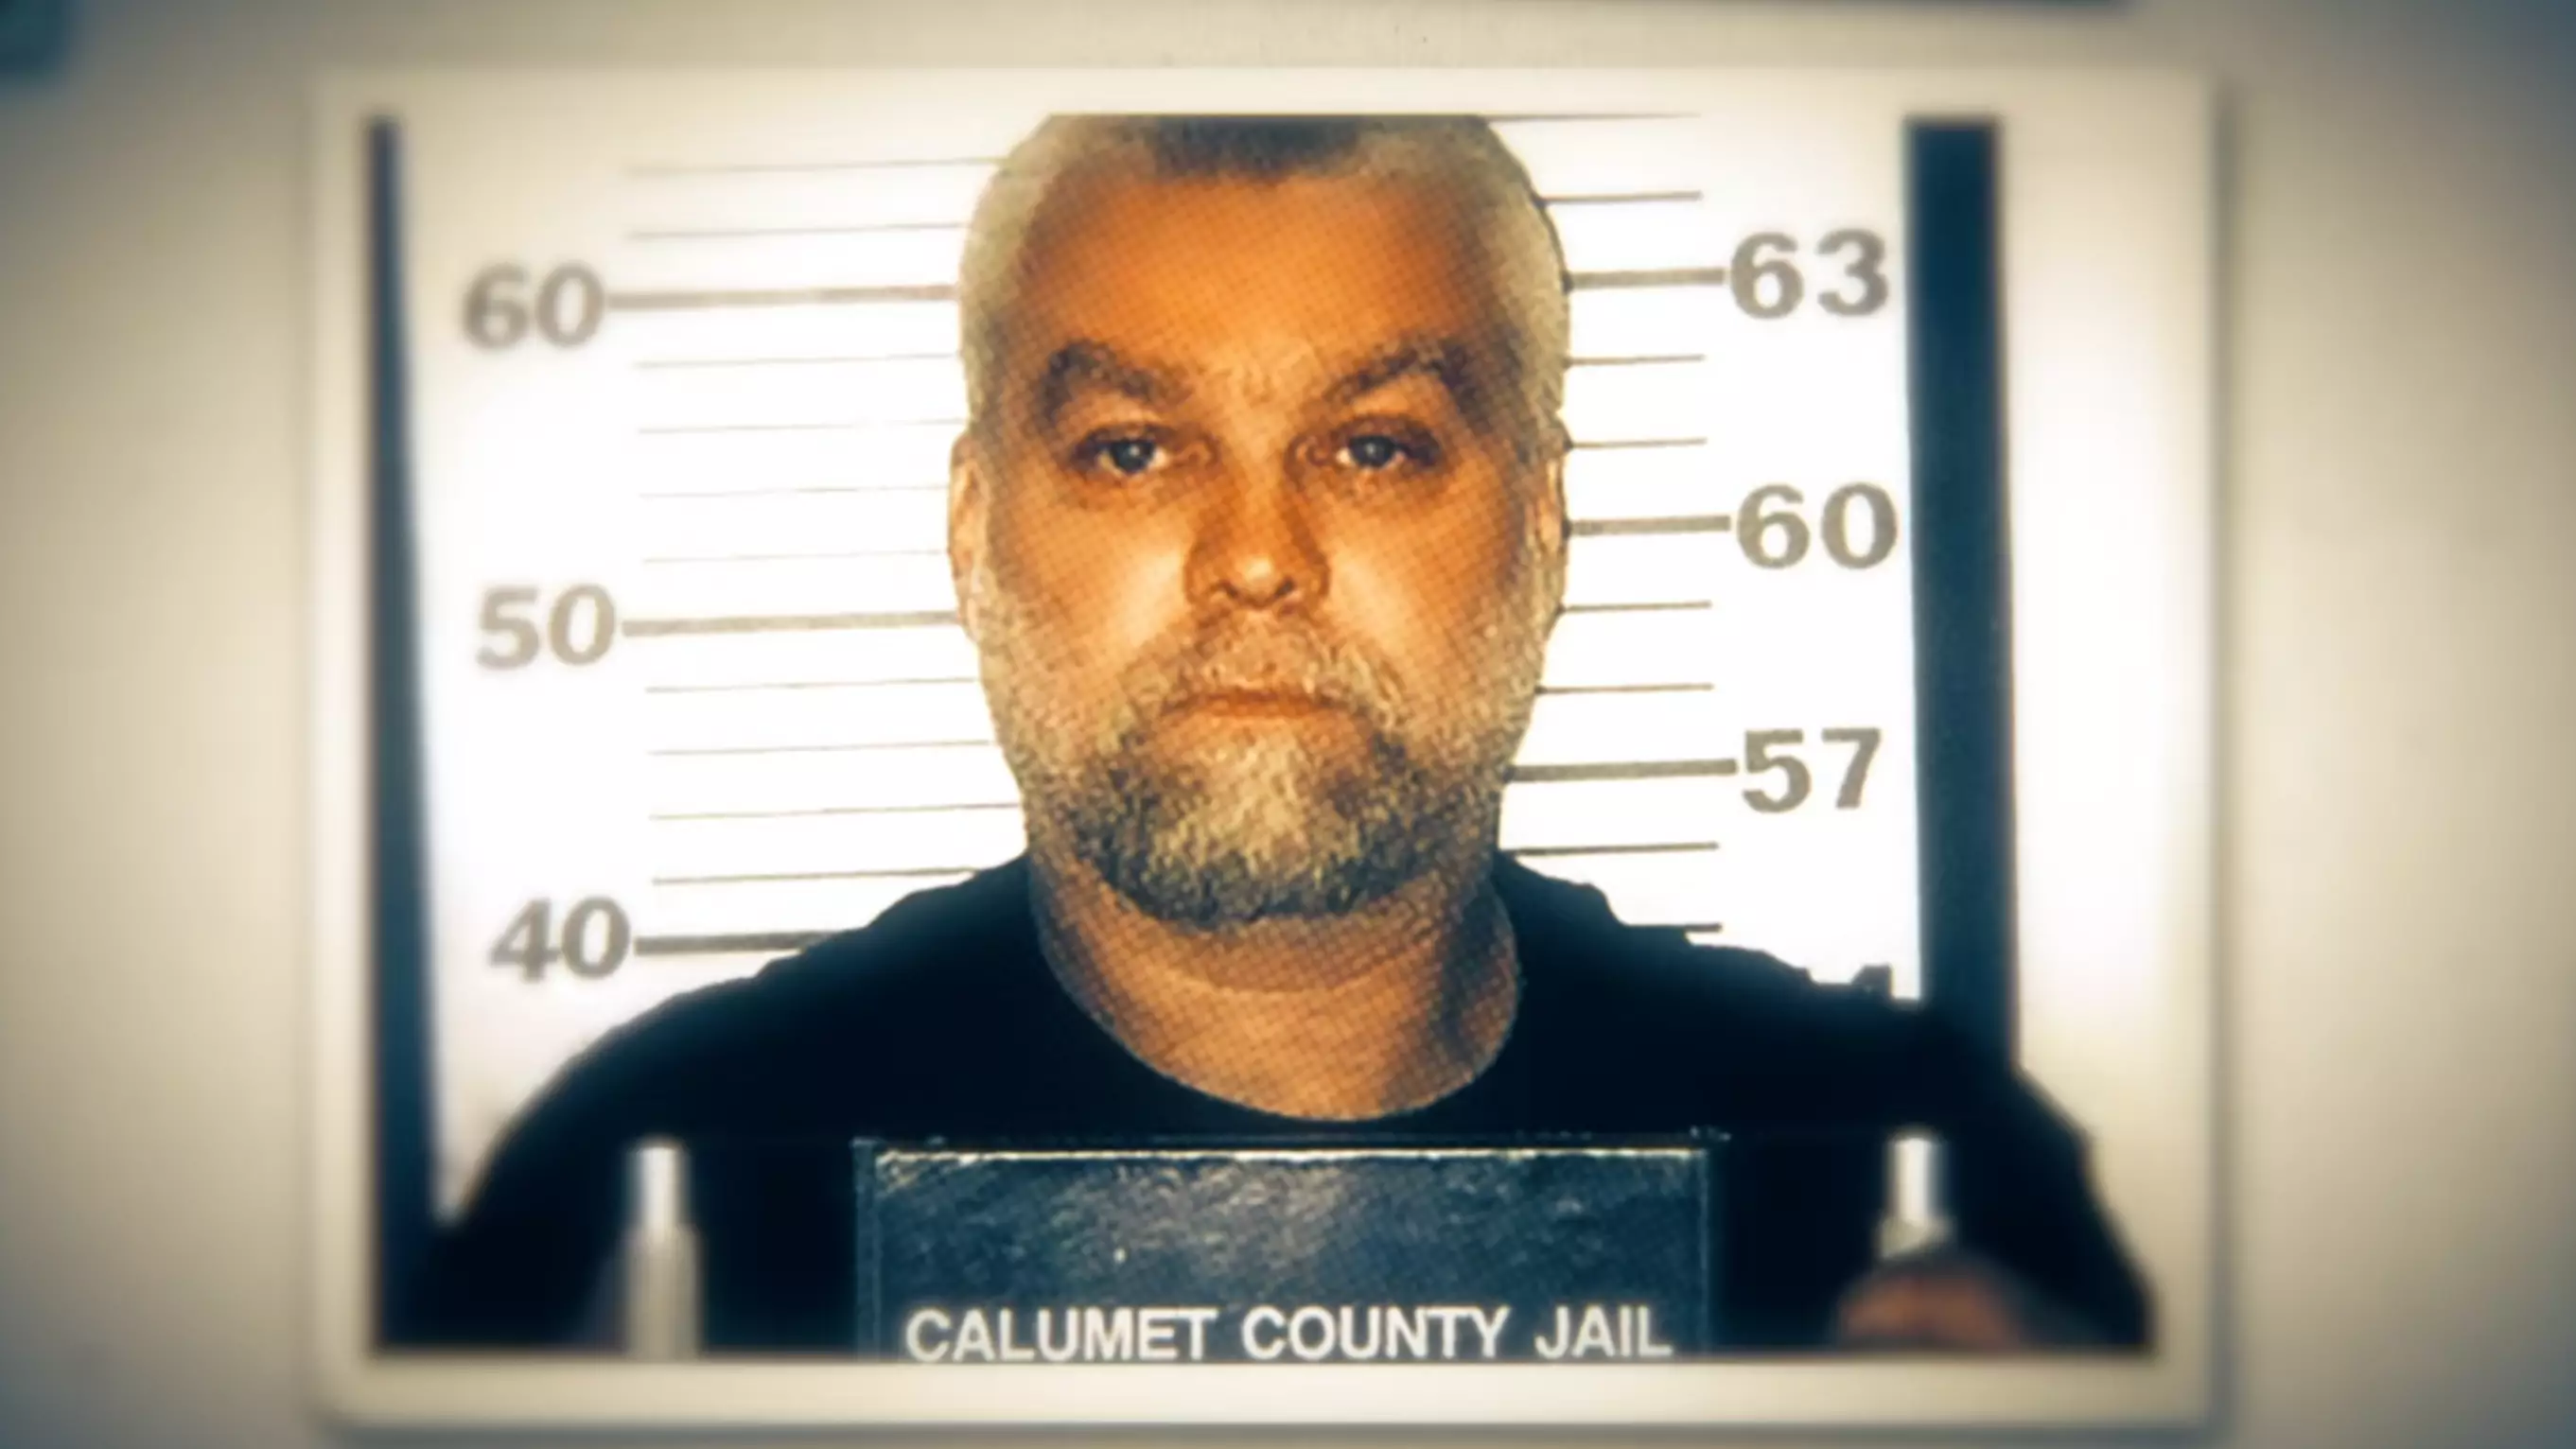 Steven Avery is the subject of the hit Netflix documentary series 'Making A Murderer'